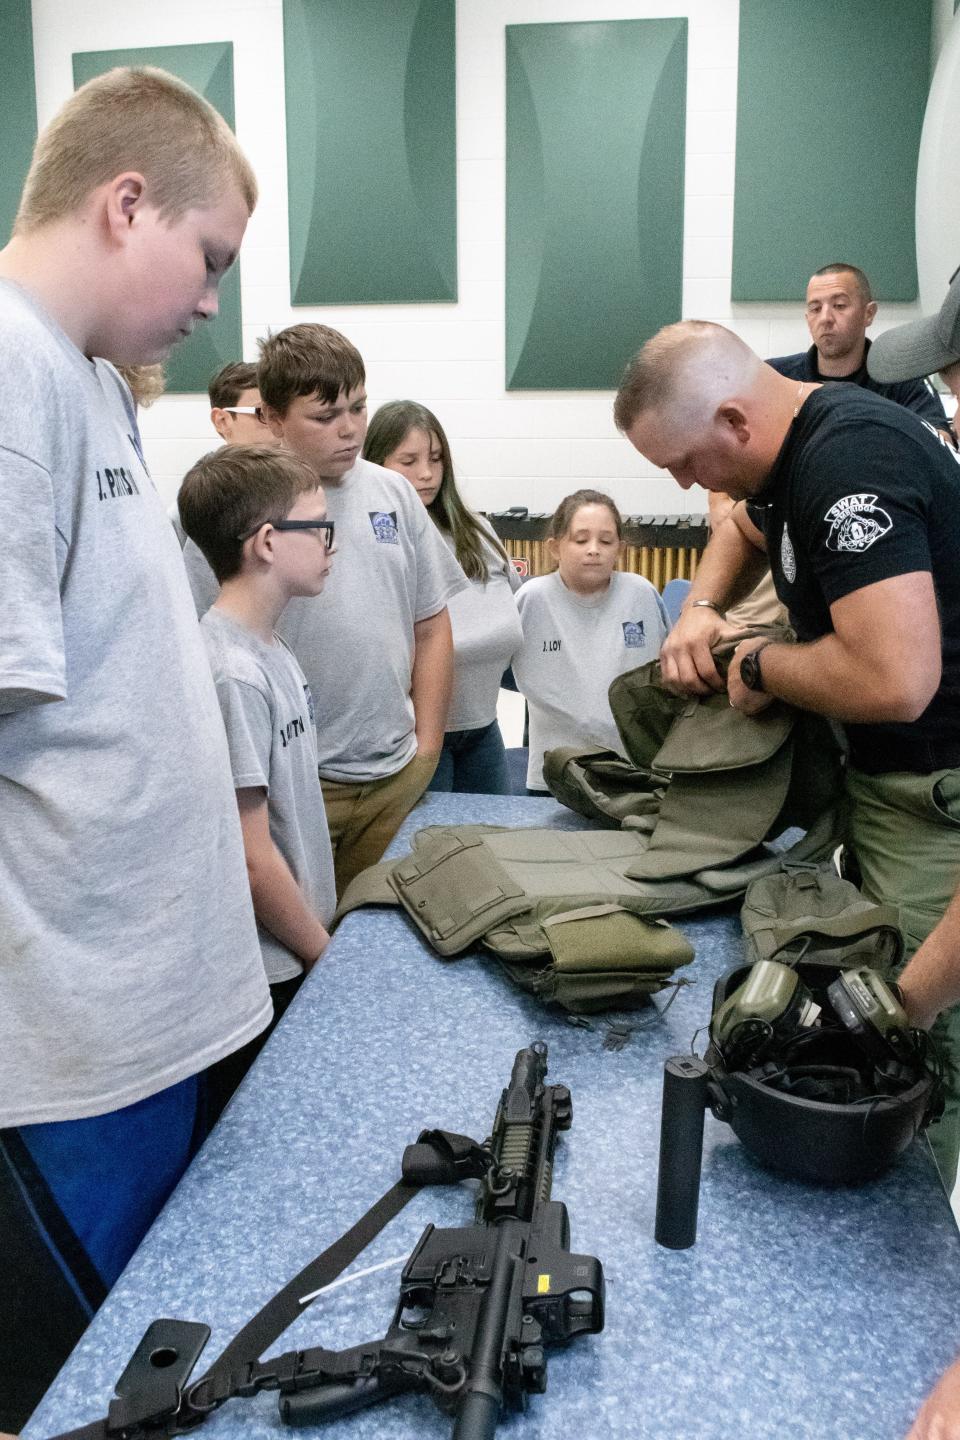 Members of the Cambridge SWAT team display their equipment and demonstrate their use to students at the Cambridge Police Youth Citizens Academy.